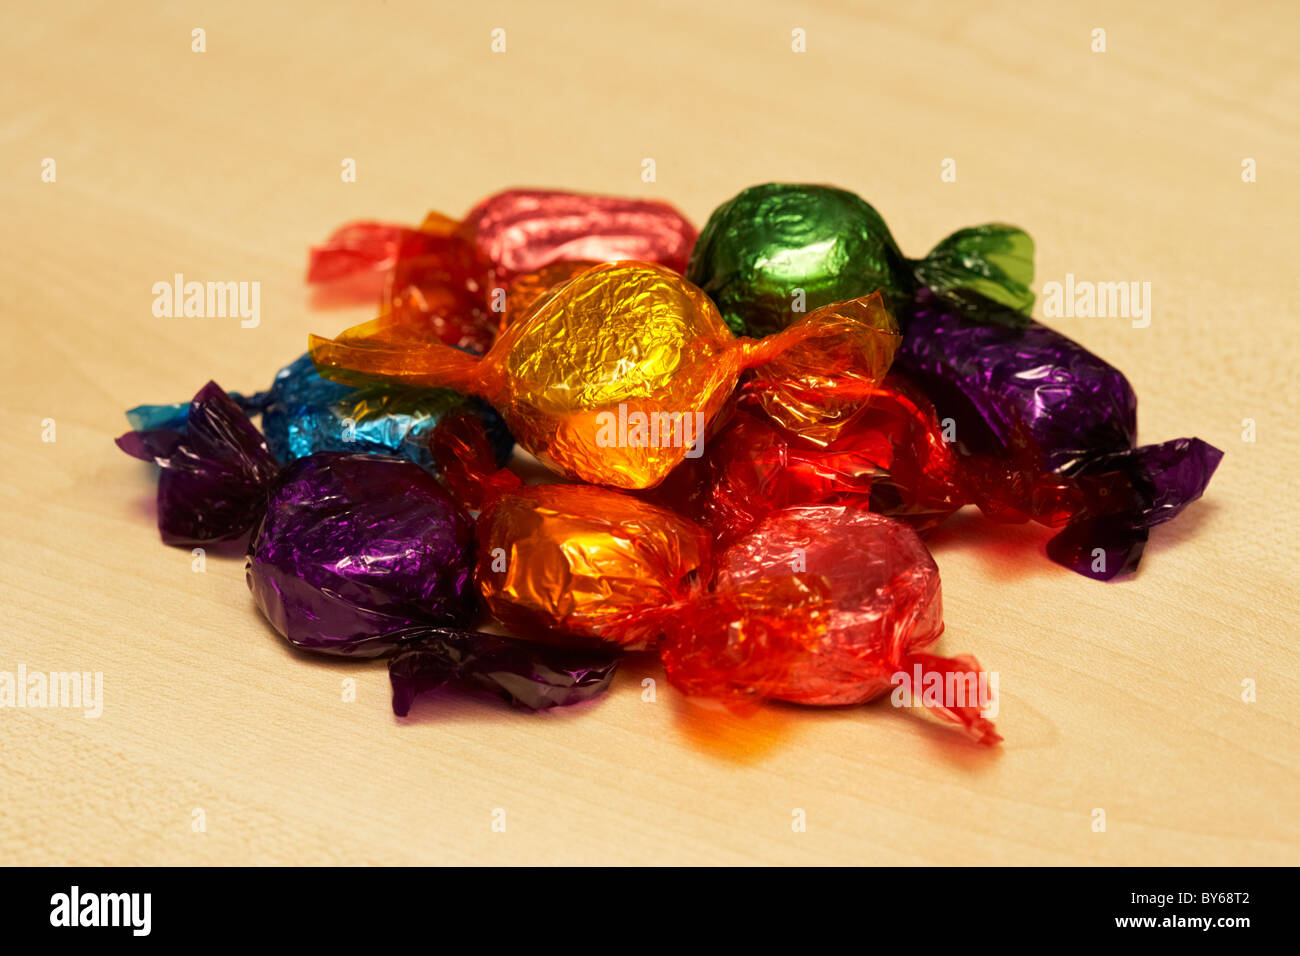 pile of wrapped up chocolate sweets in colourful wrappers on a wooden surface Stock Photo